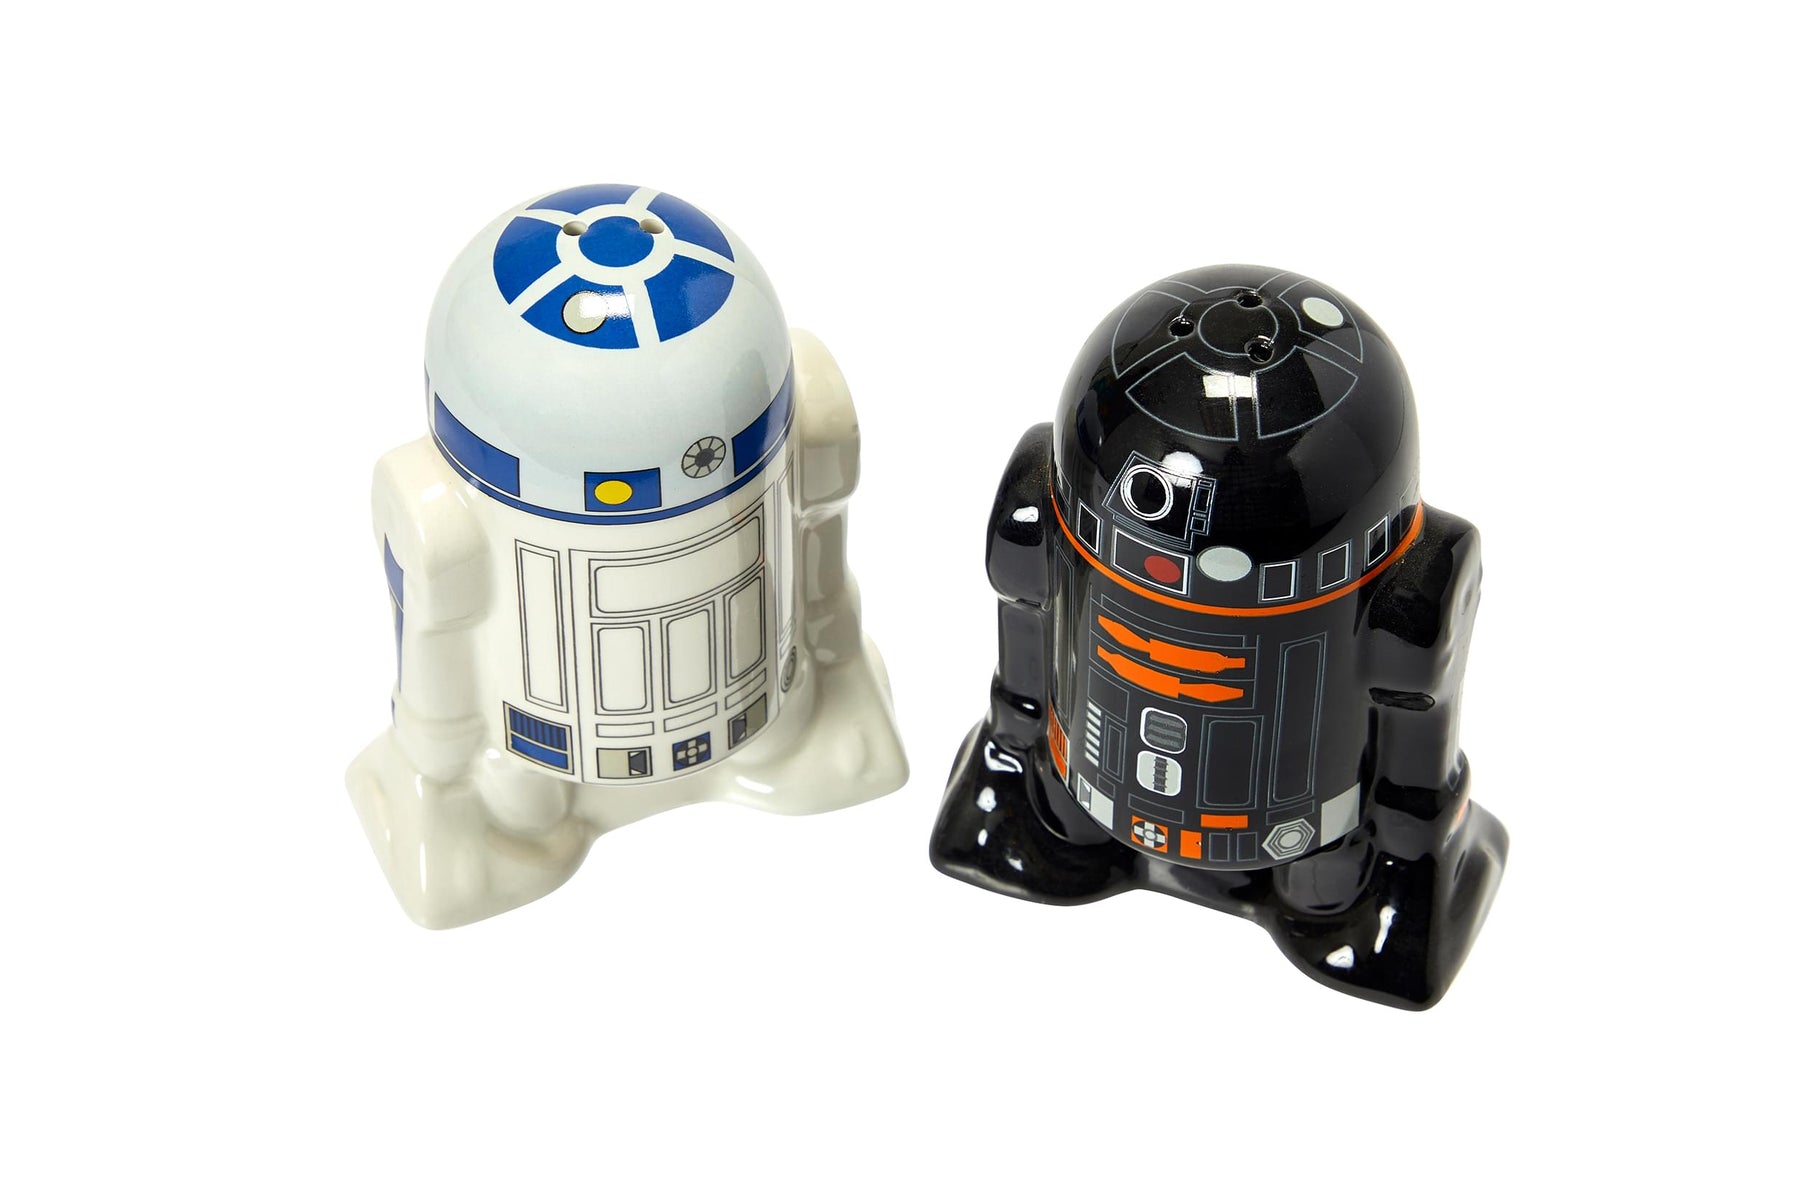 Star Wars D-O And R2-D2 Ceramic Shaker Set of 2